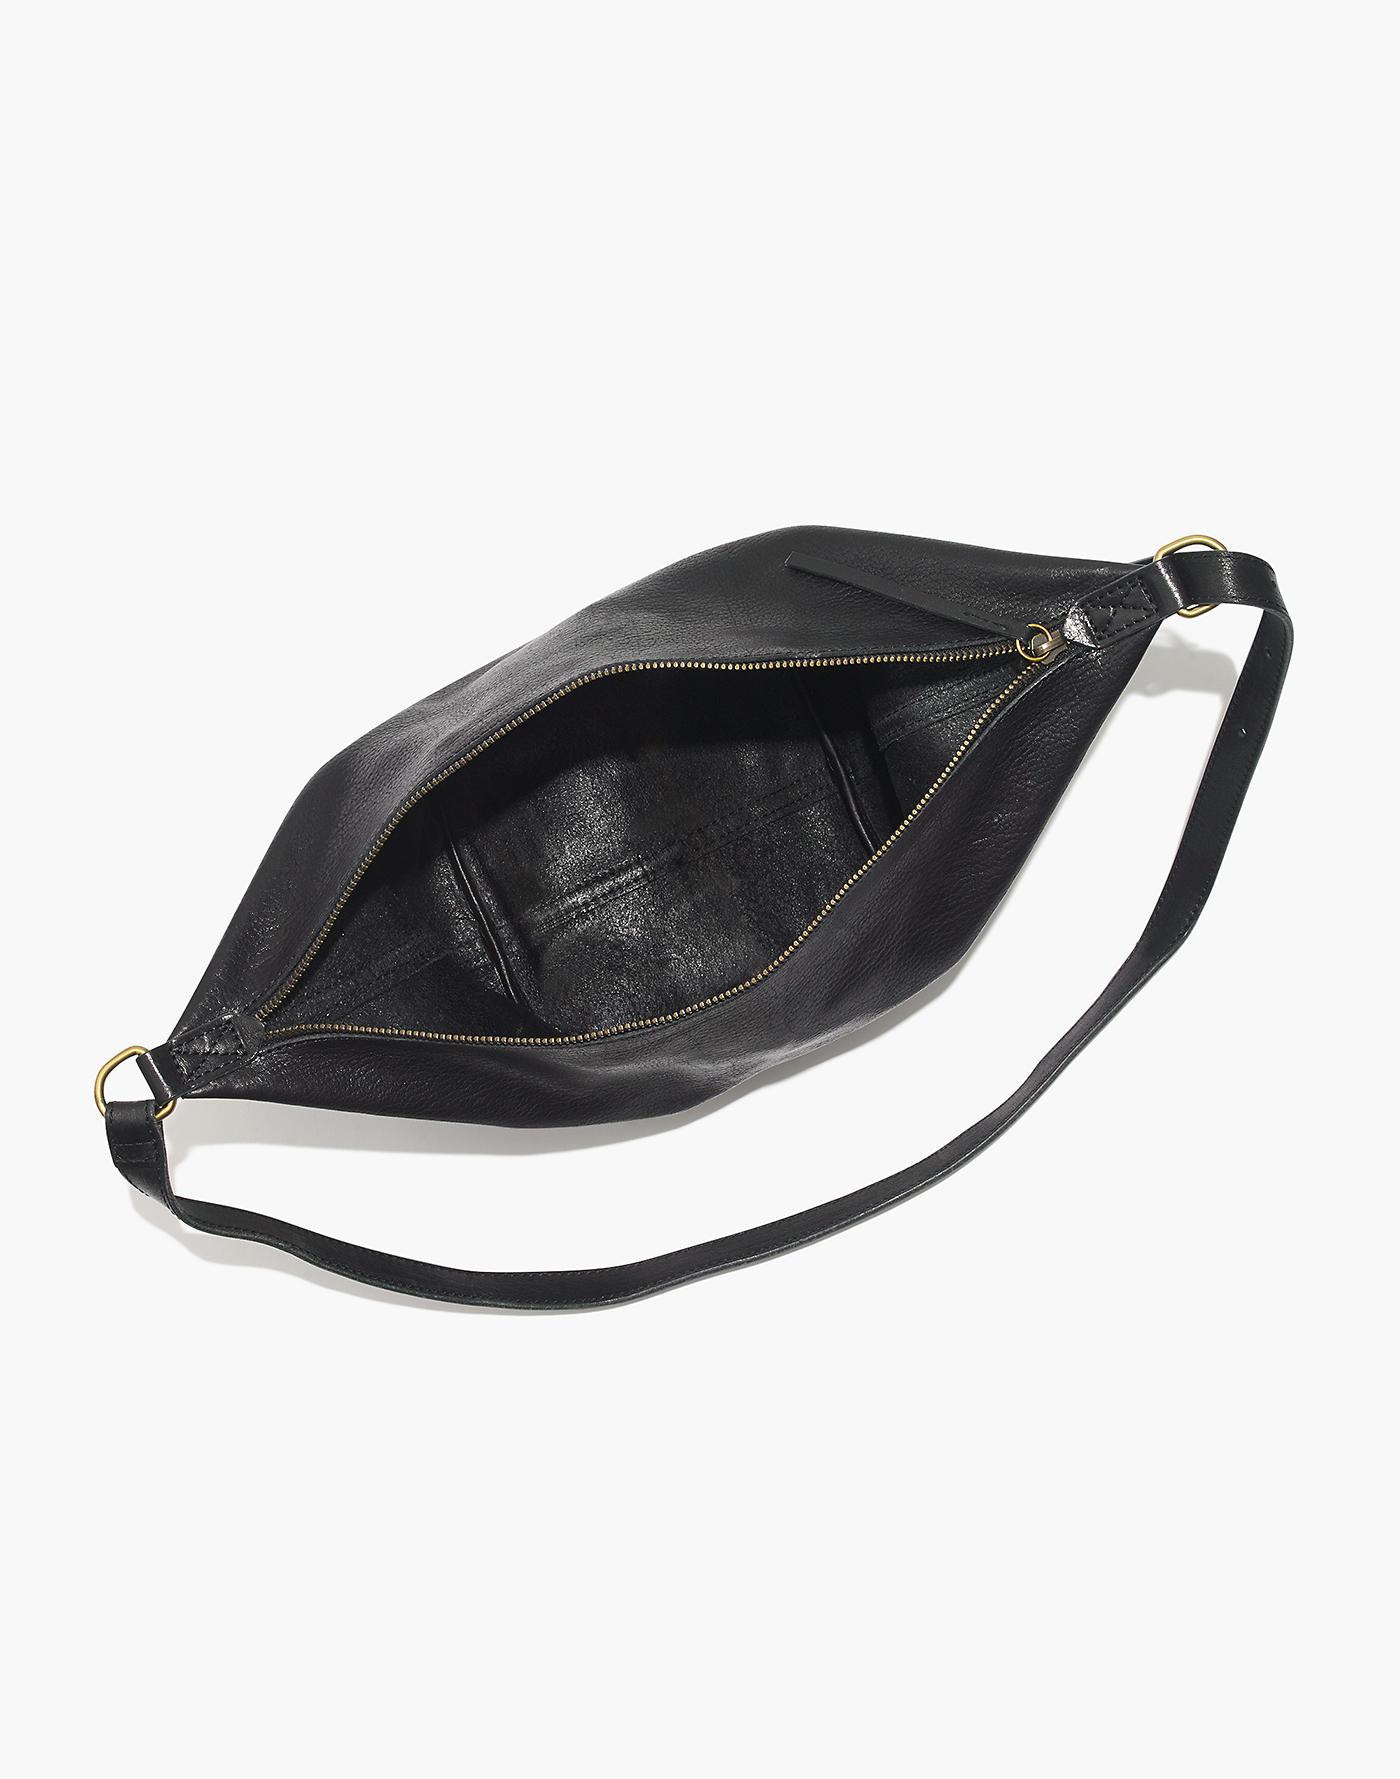 Madewell The Leather Sling Bag in Black - Lyst